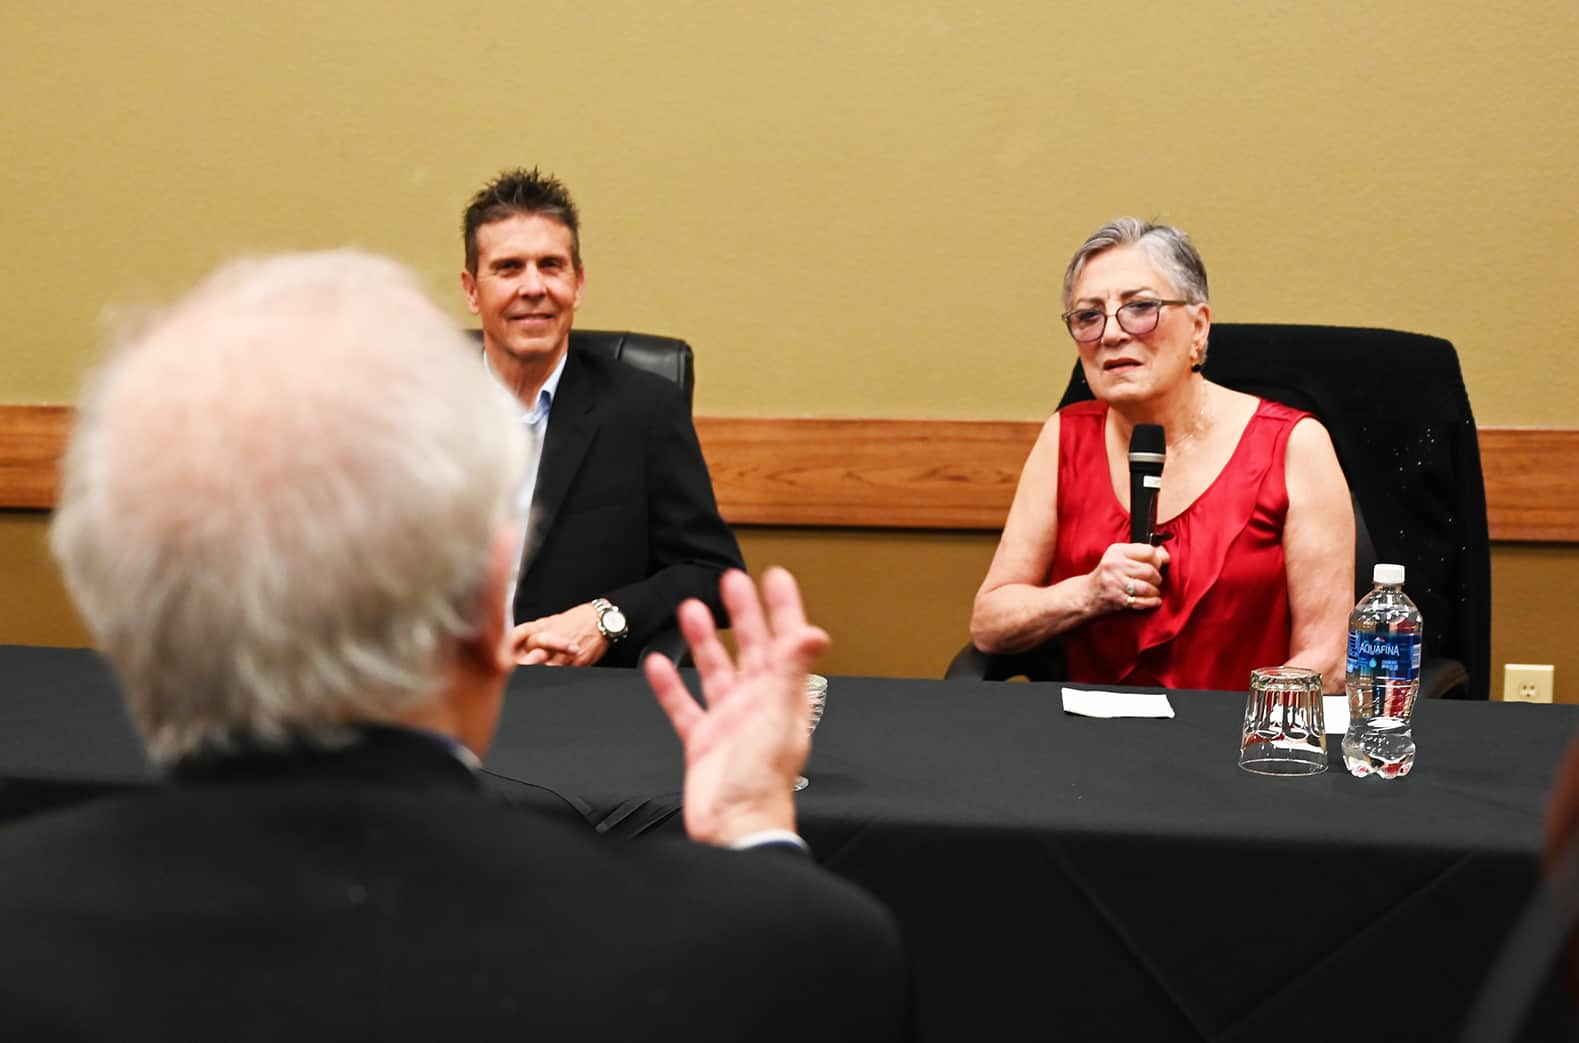 Shirley muldowney fields questions during a press conference announcing her induction into the national motorsports press association hall of fame. Photo by jerry jordan/kickin' the tires